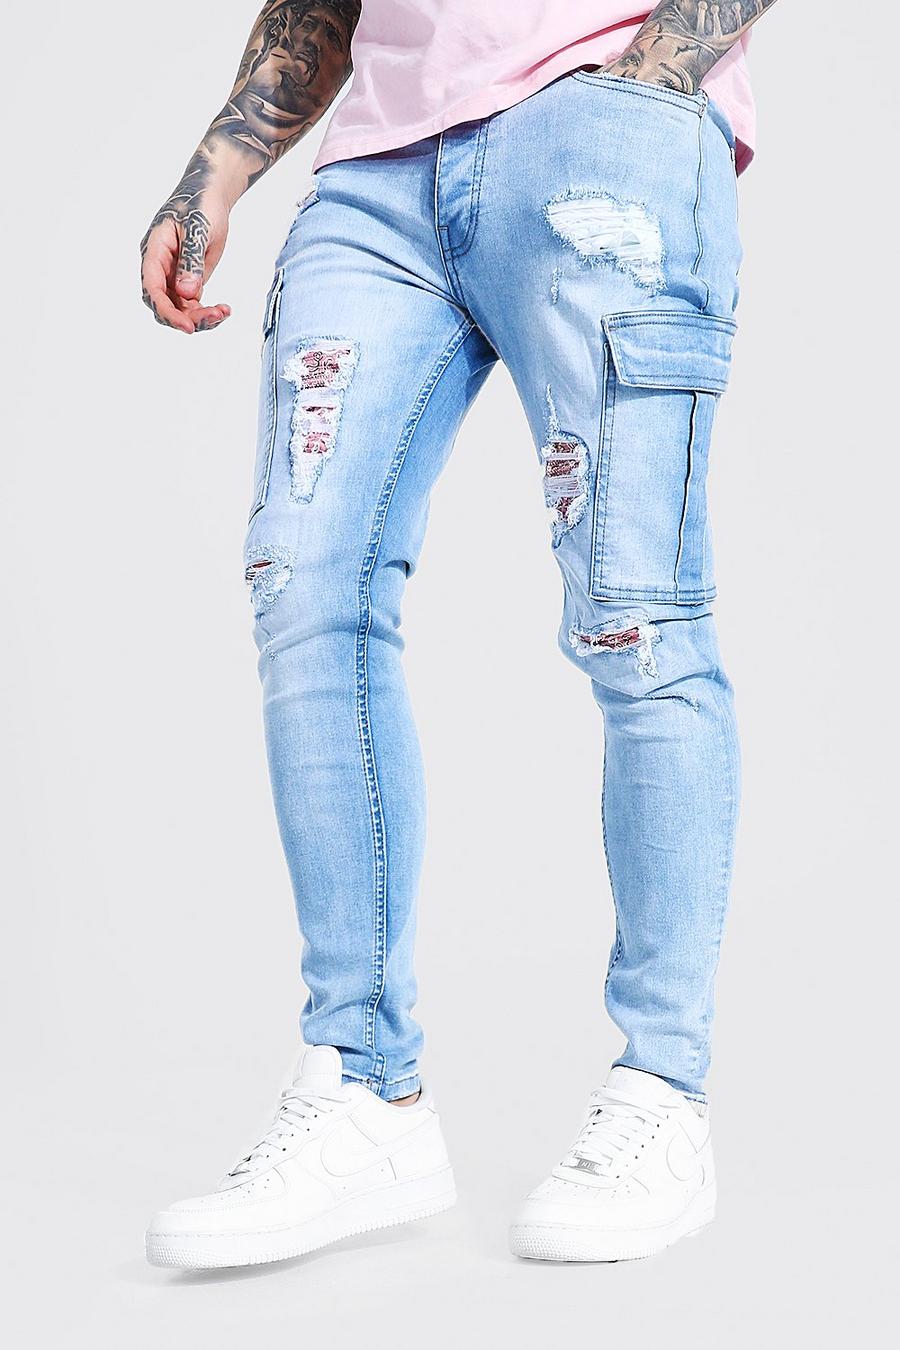 fordom grafisk Mars Men's Ripped Jeans |Men's Distressed Jeans | boohoo USA